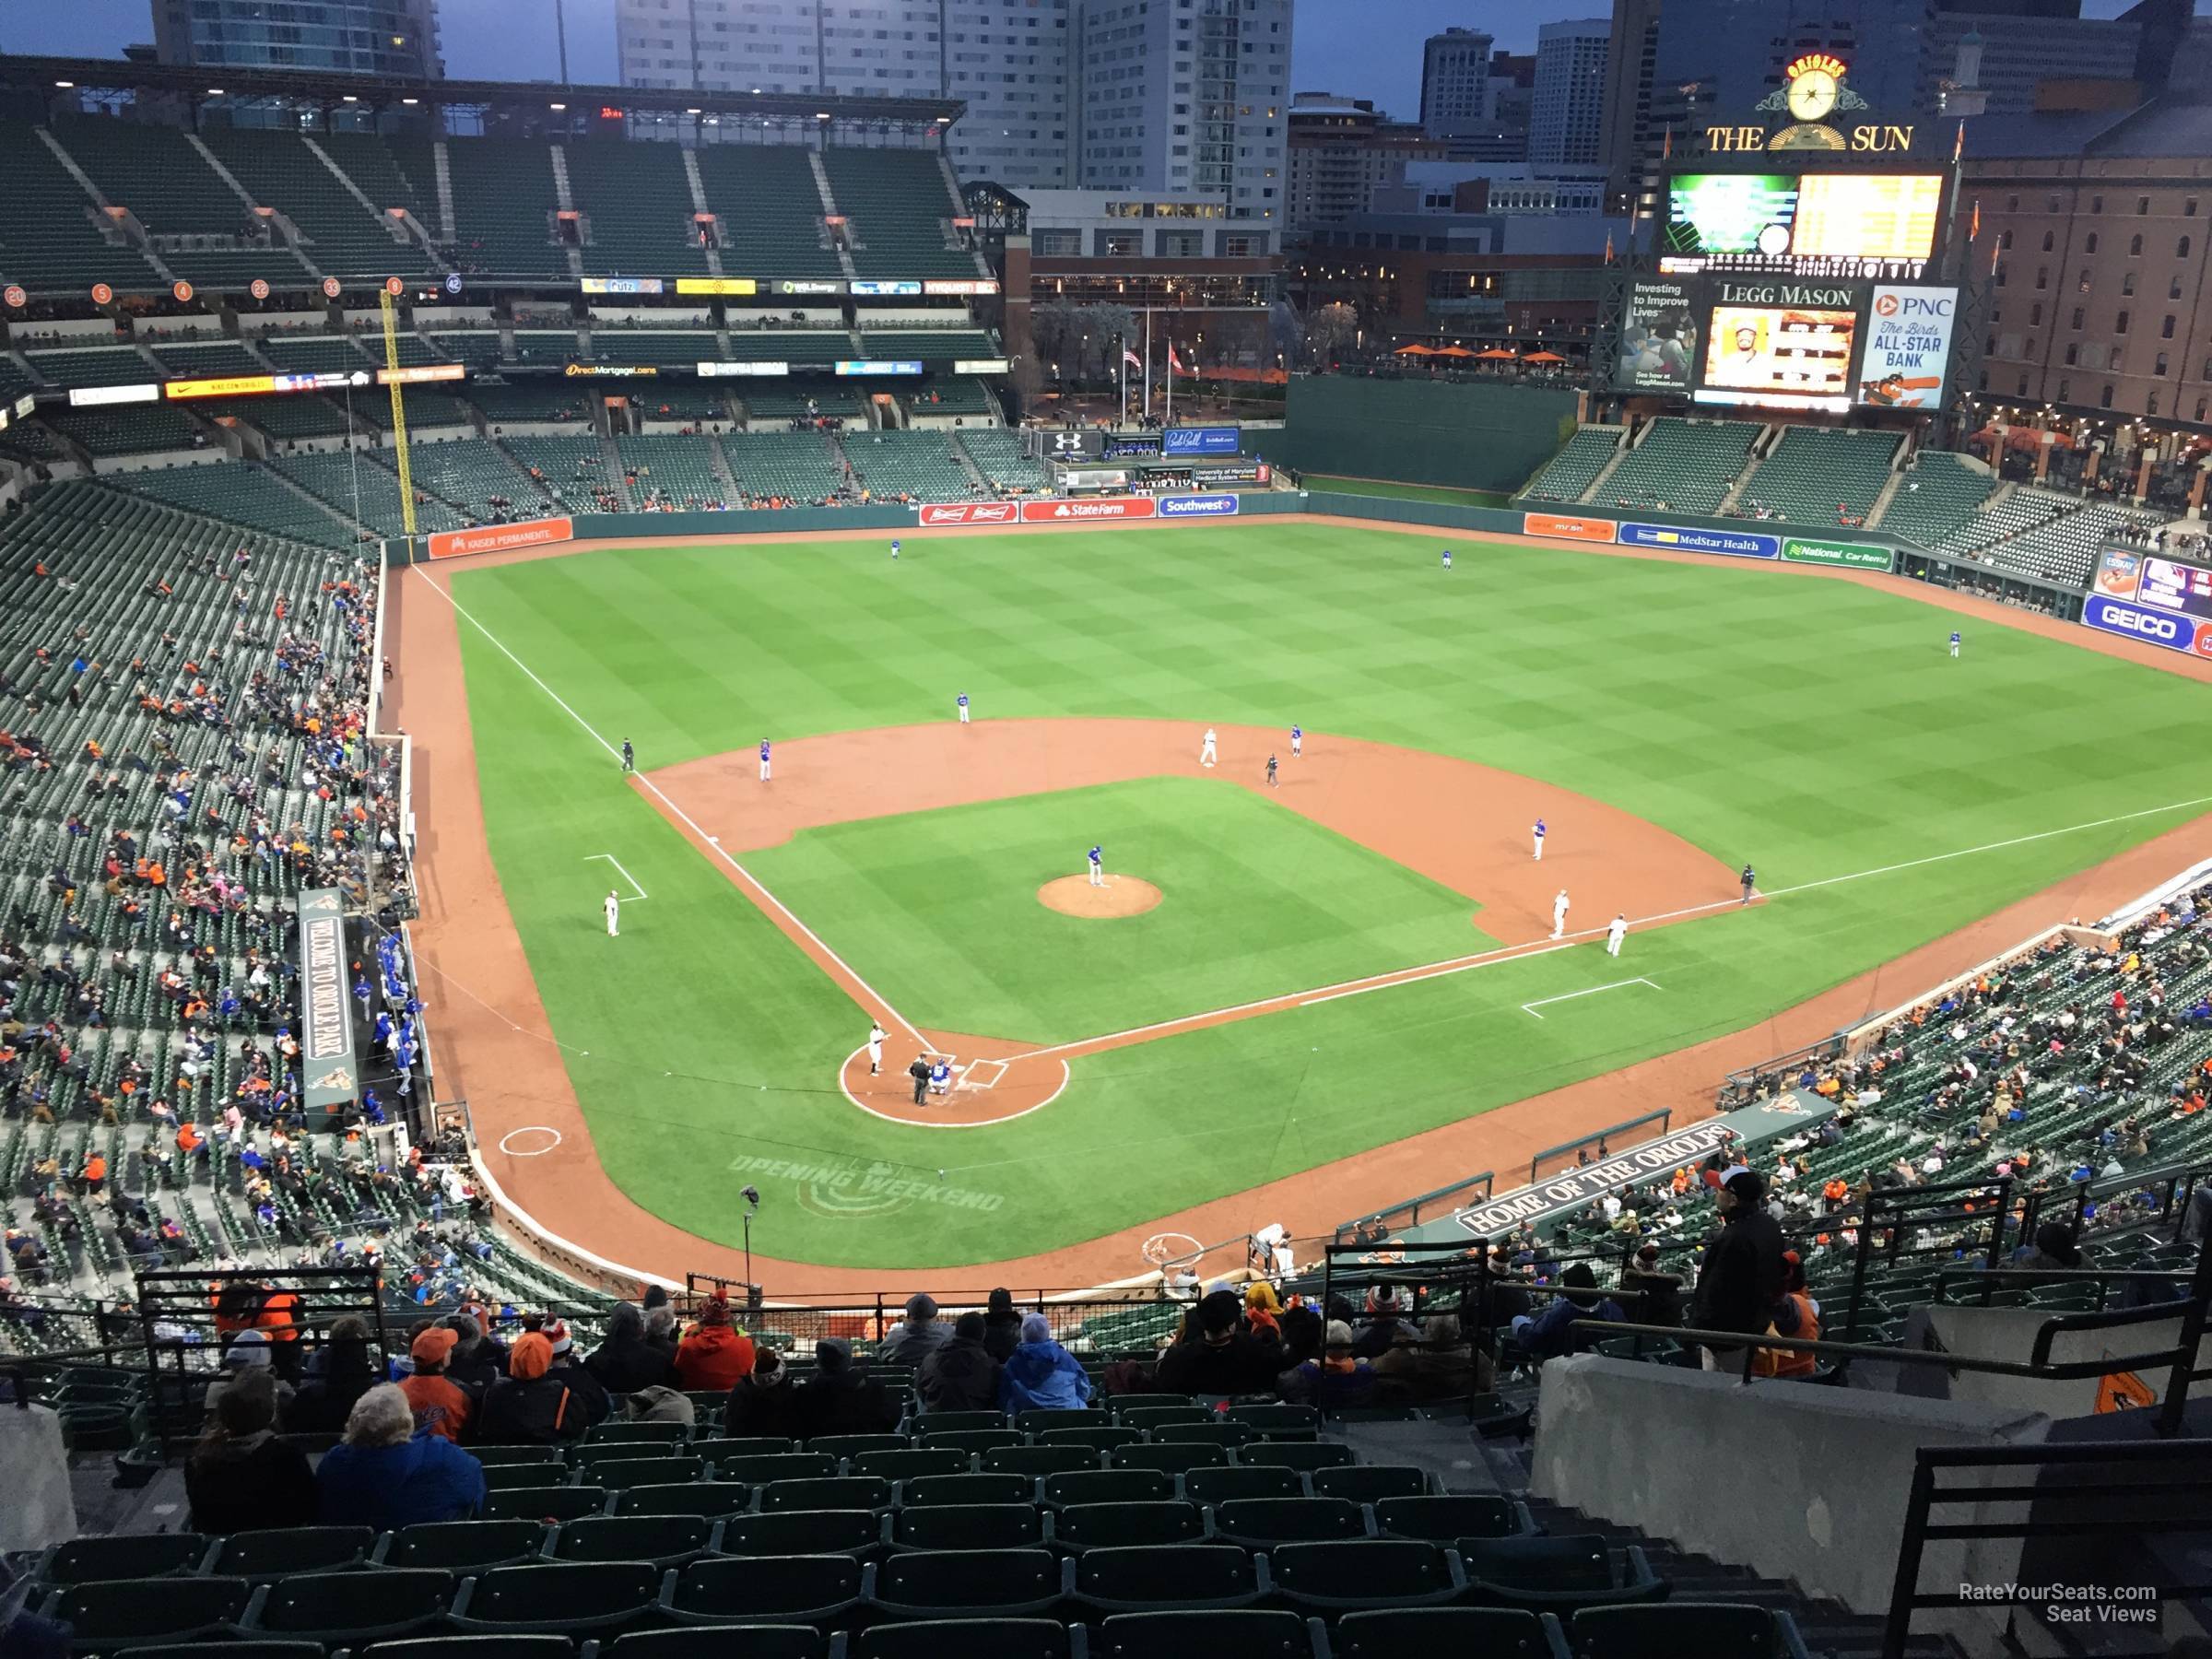 Section 332 at Oriole Park 